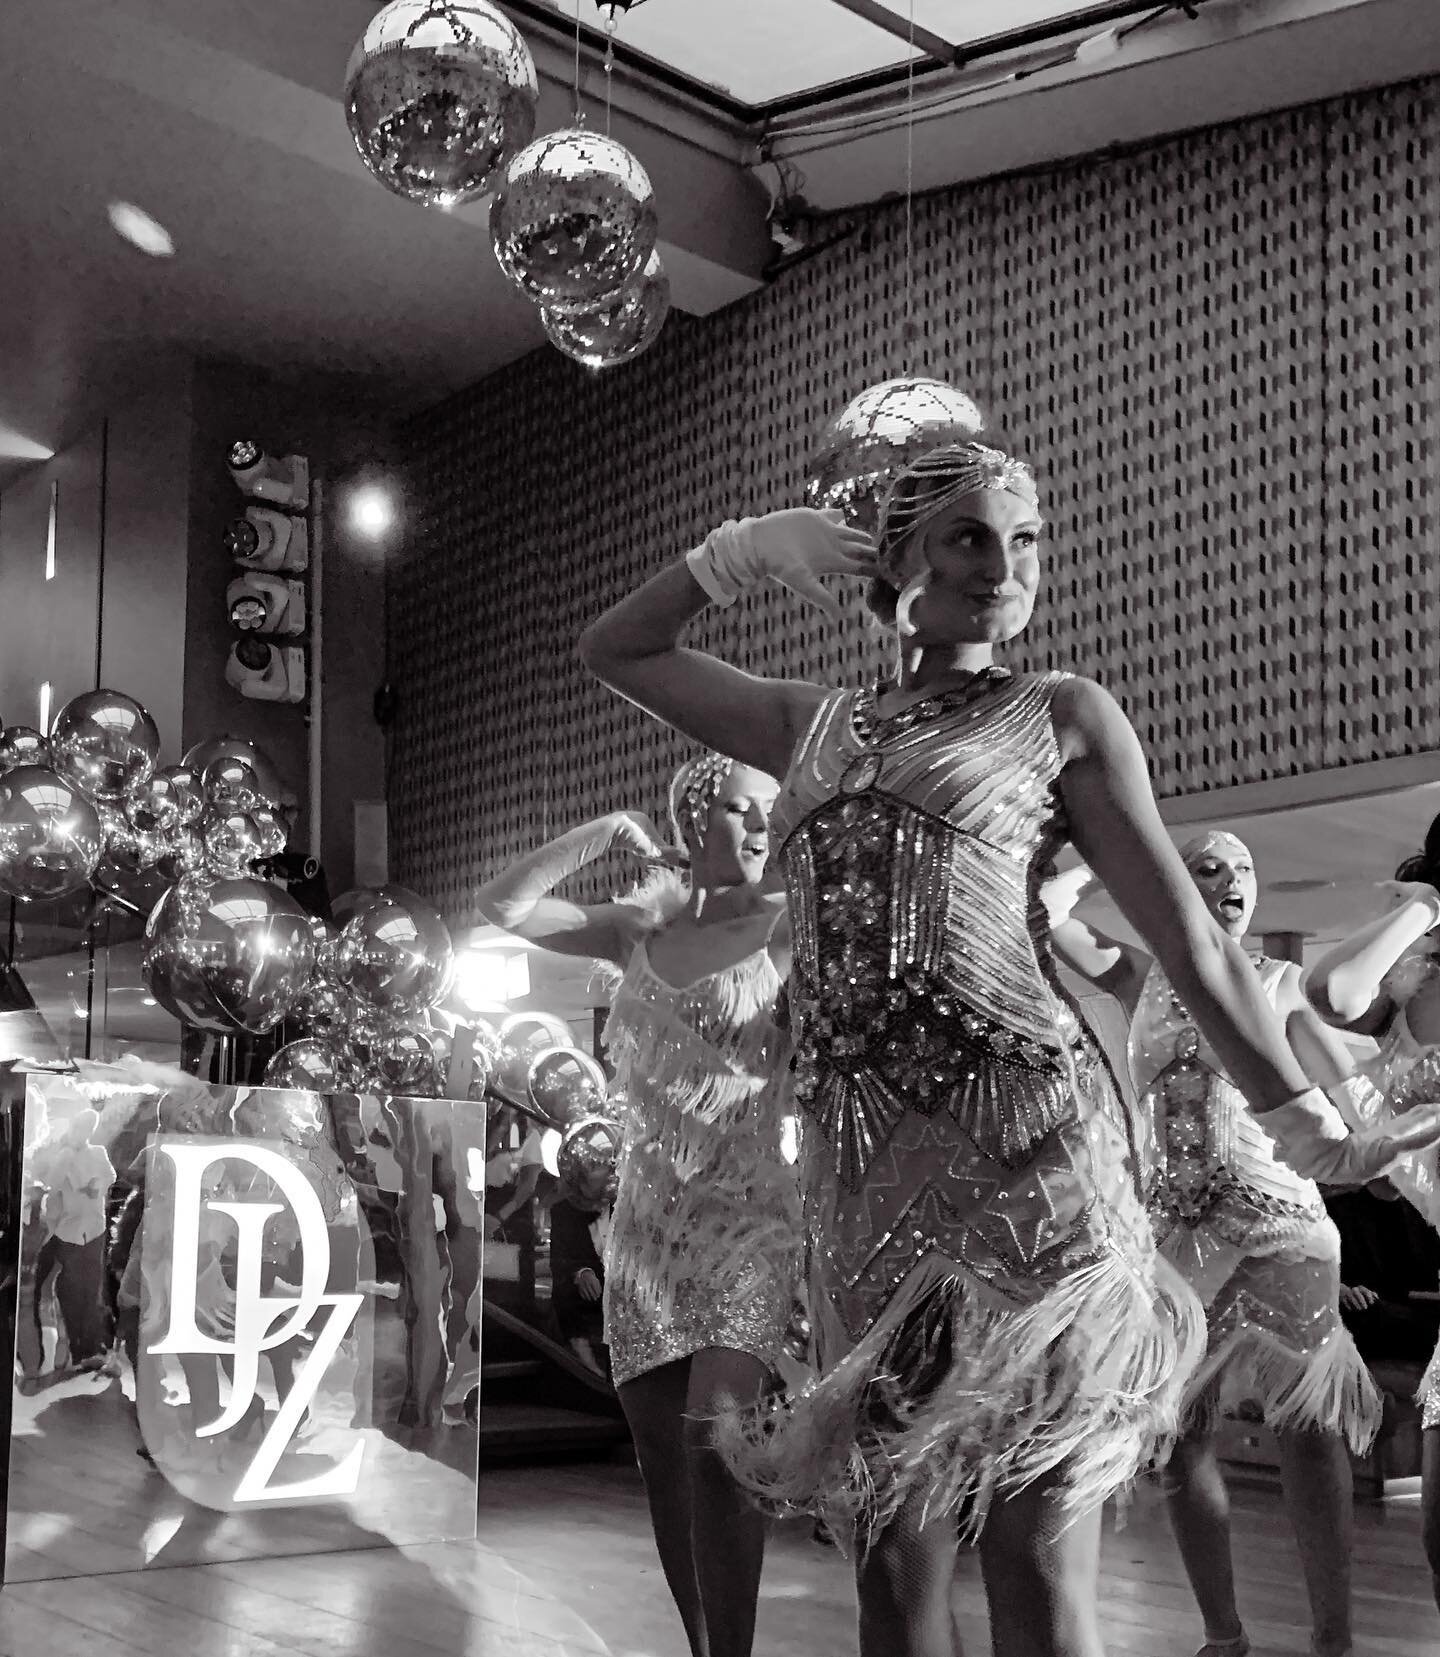 Channeling the spirit of the roaring twenties: where flapper girls shimmered like sequins and Gatsby dancers twirled through the night. Embracing the era of jazz and freedom, we dance through life with the same exuberance and sparkle. 

Venue; @woods